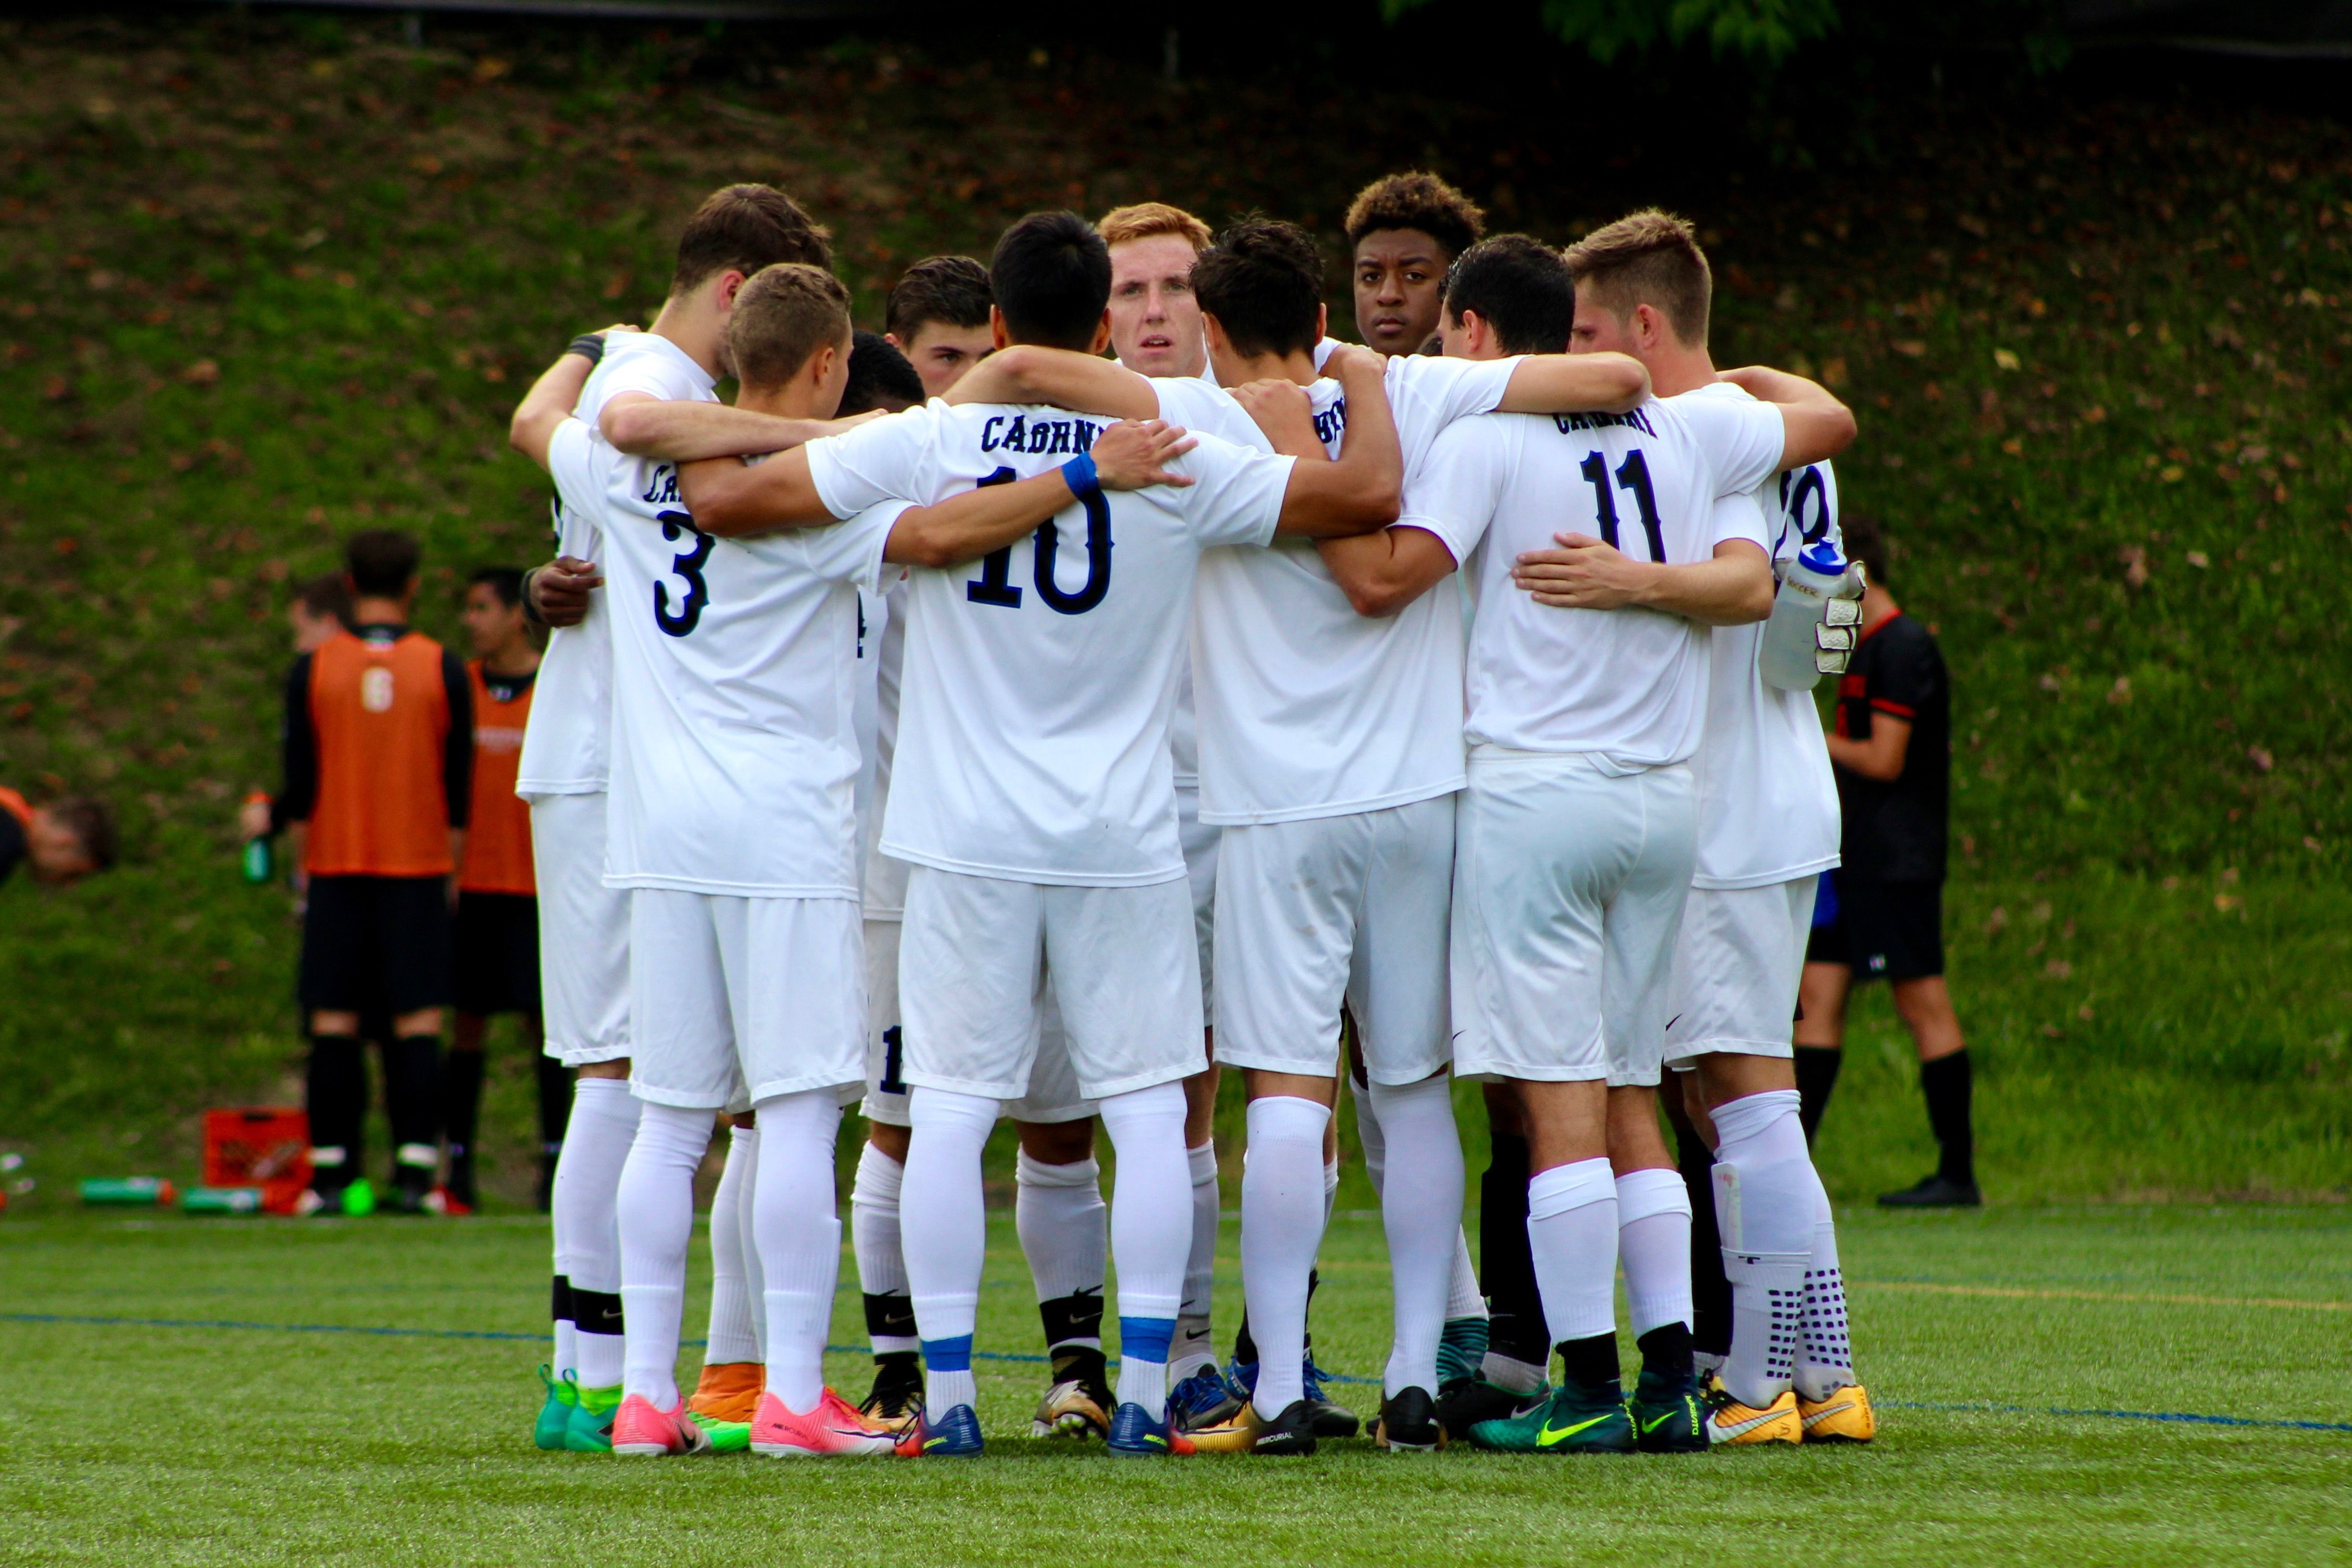 Soccer team in a huddle - Photo by Michelle Guerin